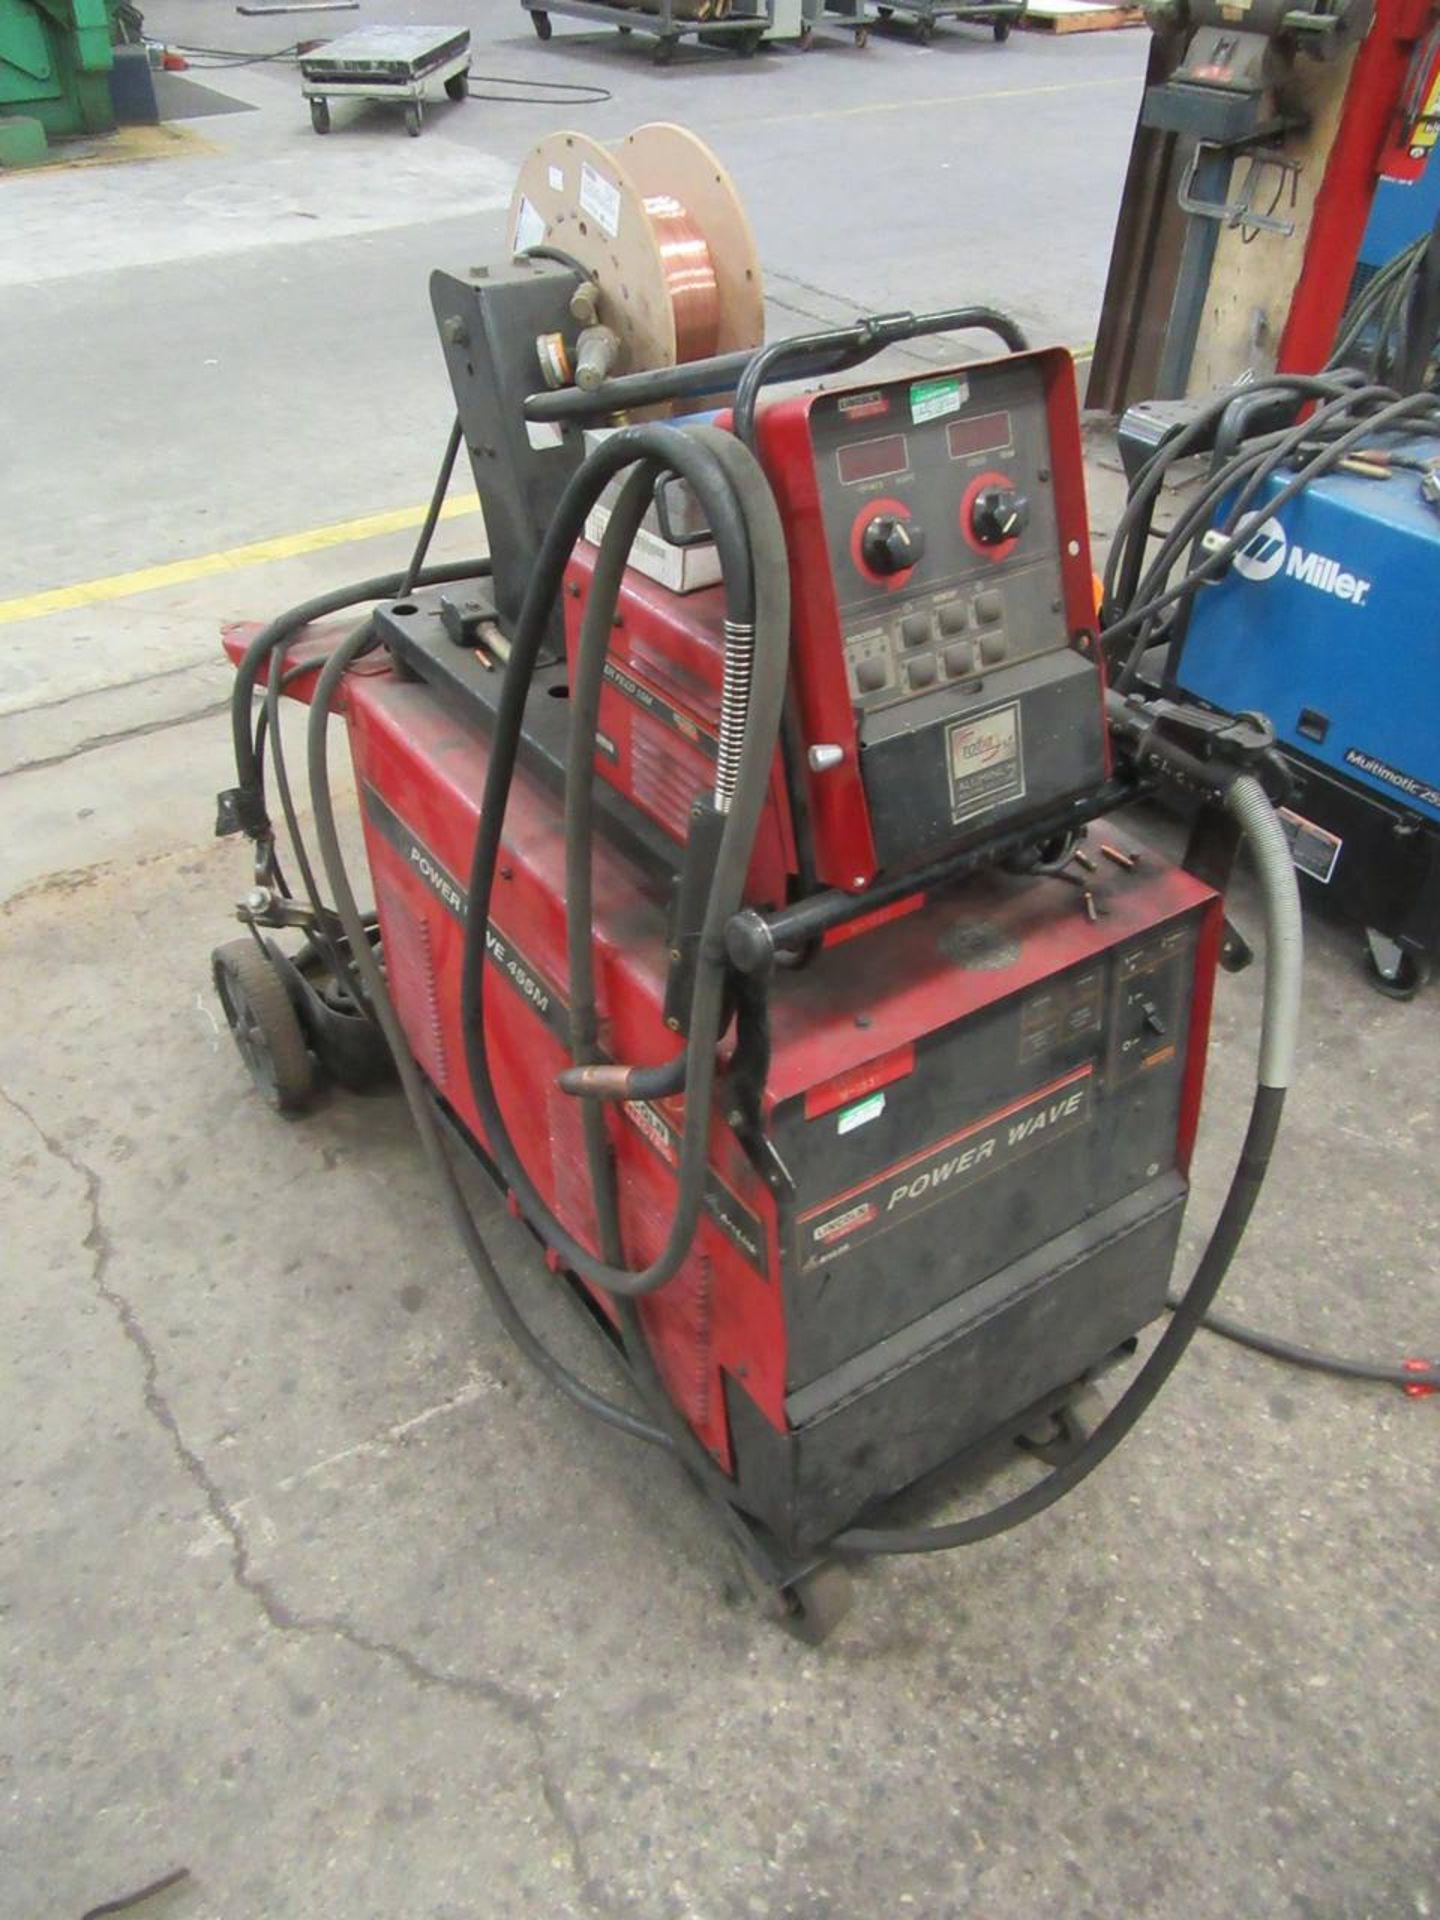 2007 Lincoln Power Wave 455M Advance Process Welder - Image 2 of 5